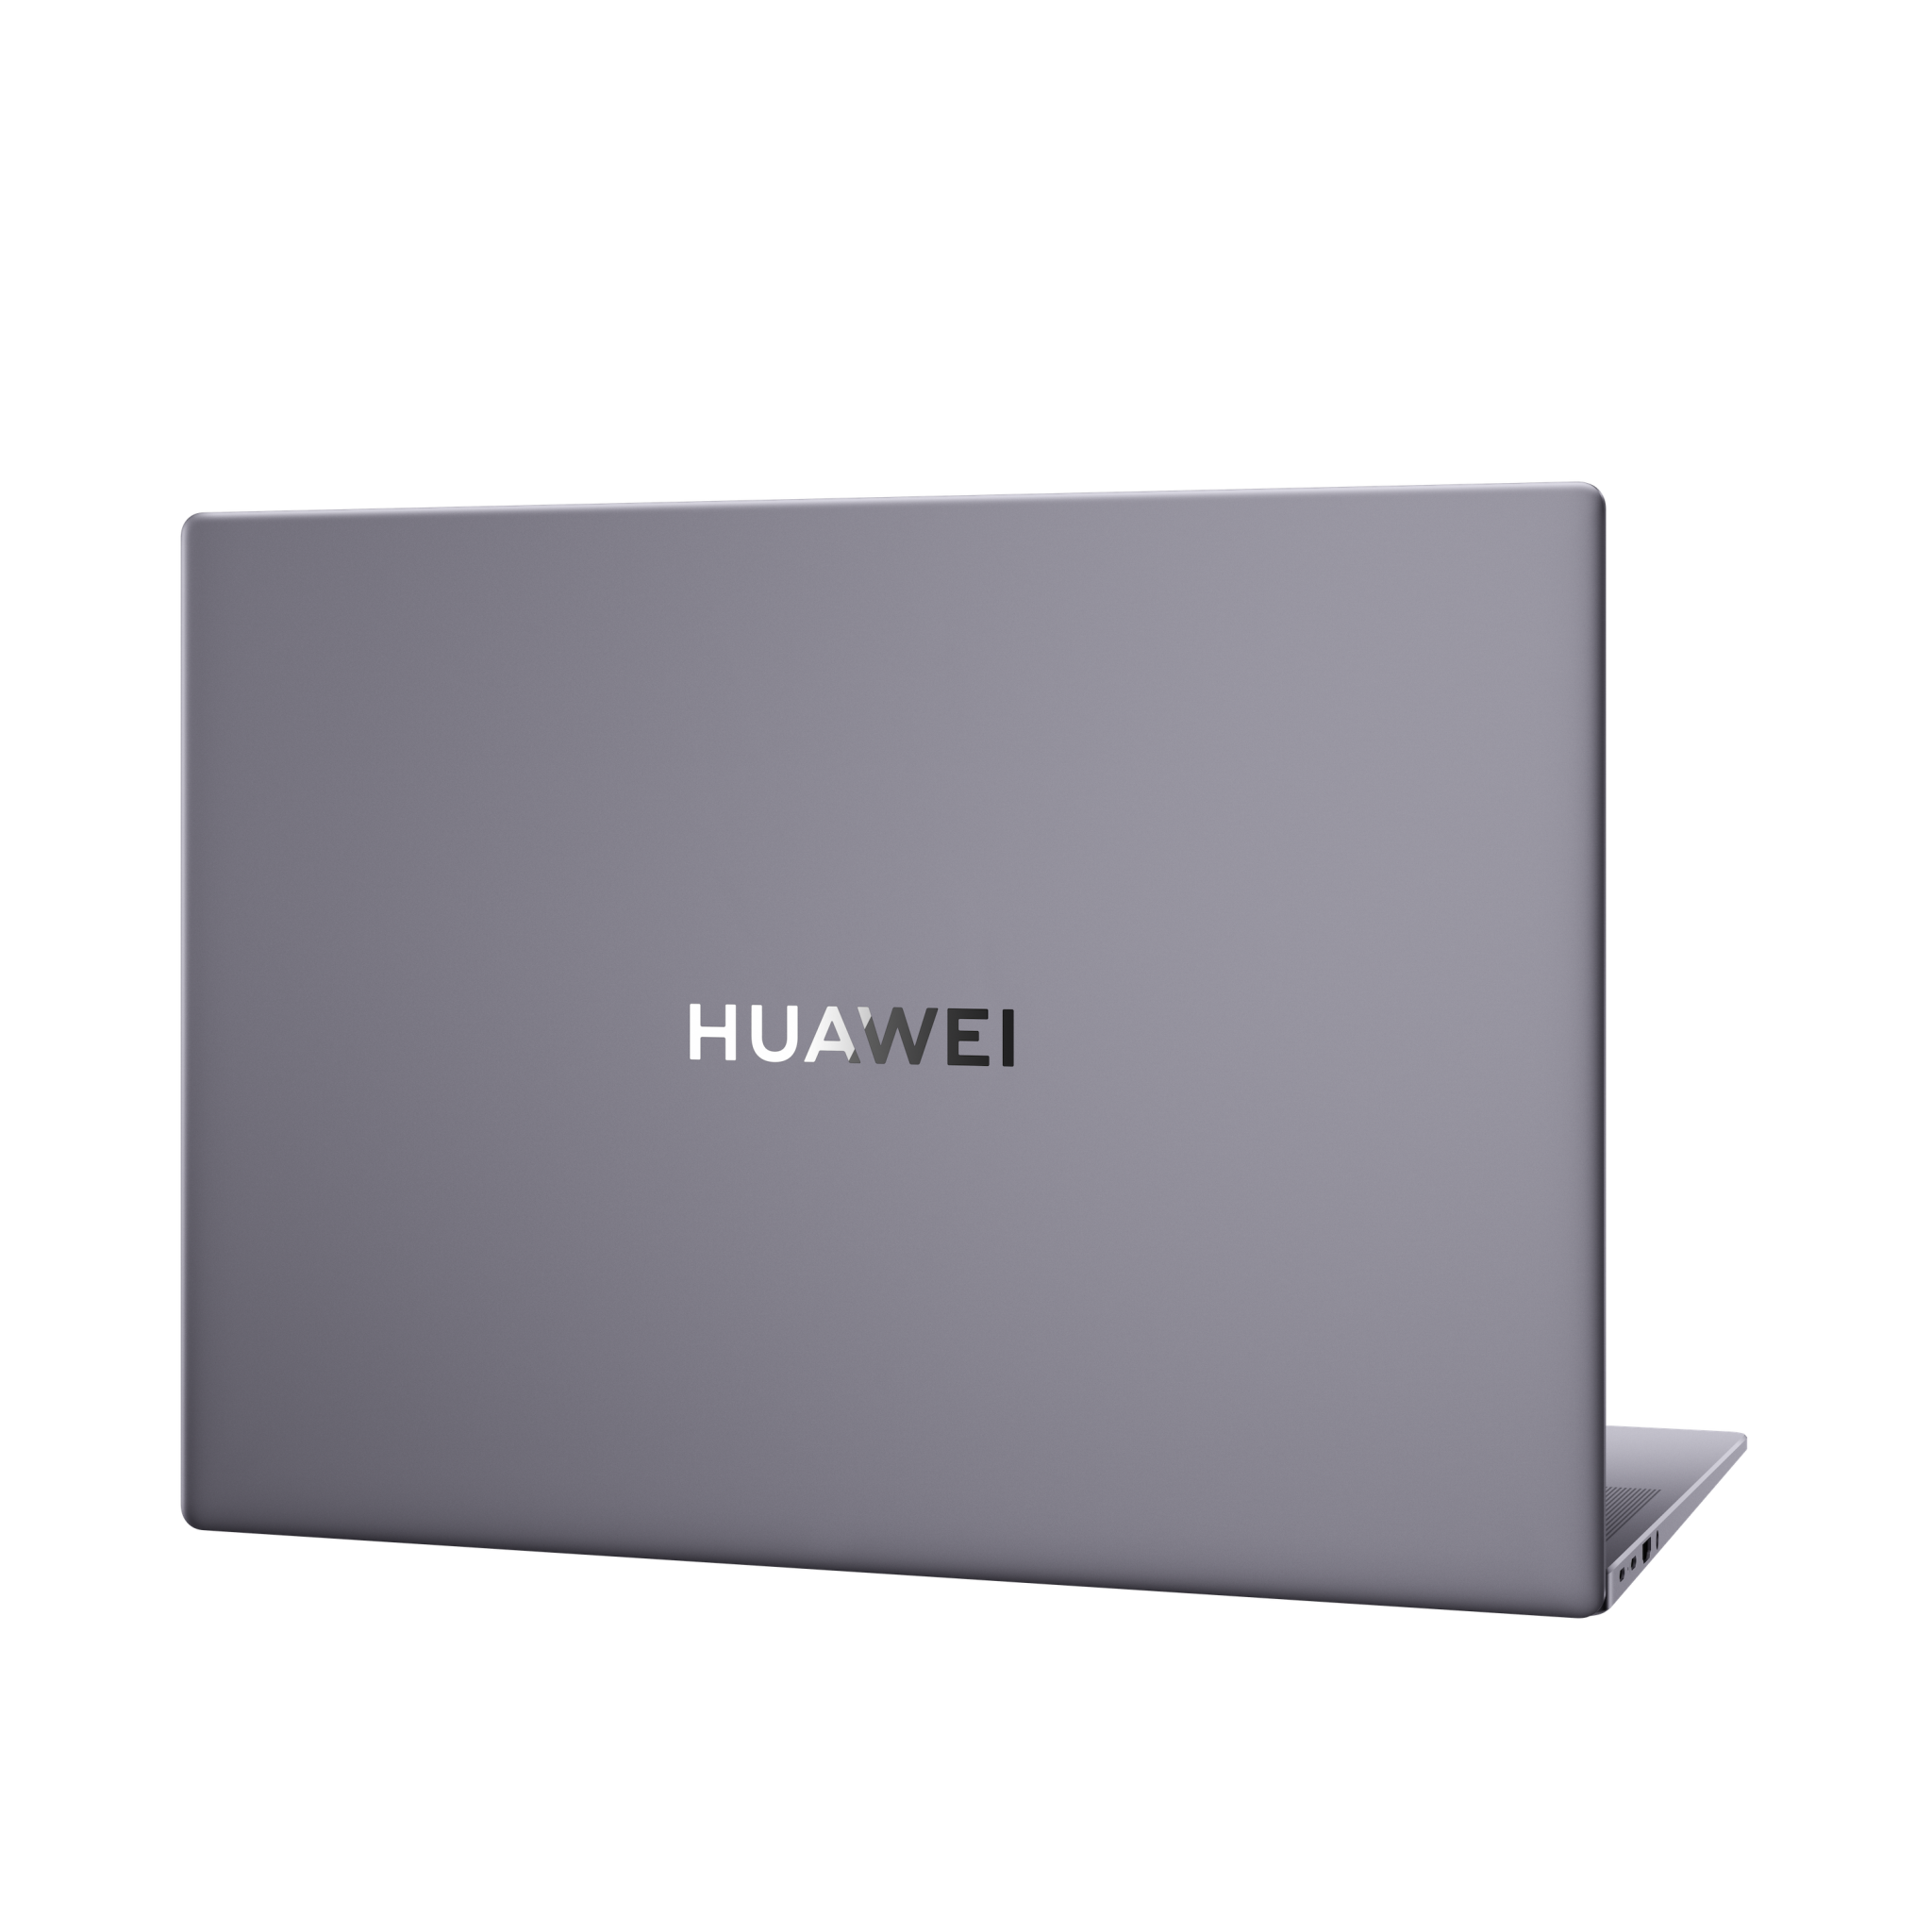 HUAWEI MateBook 16s: the laptop designed for the era of hybrid work